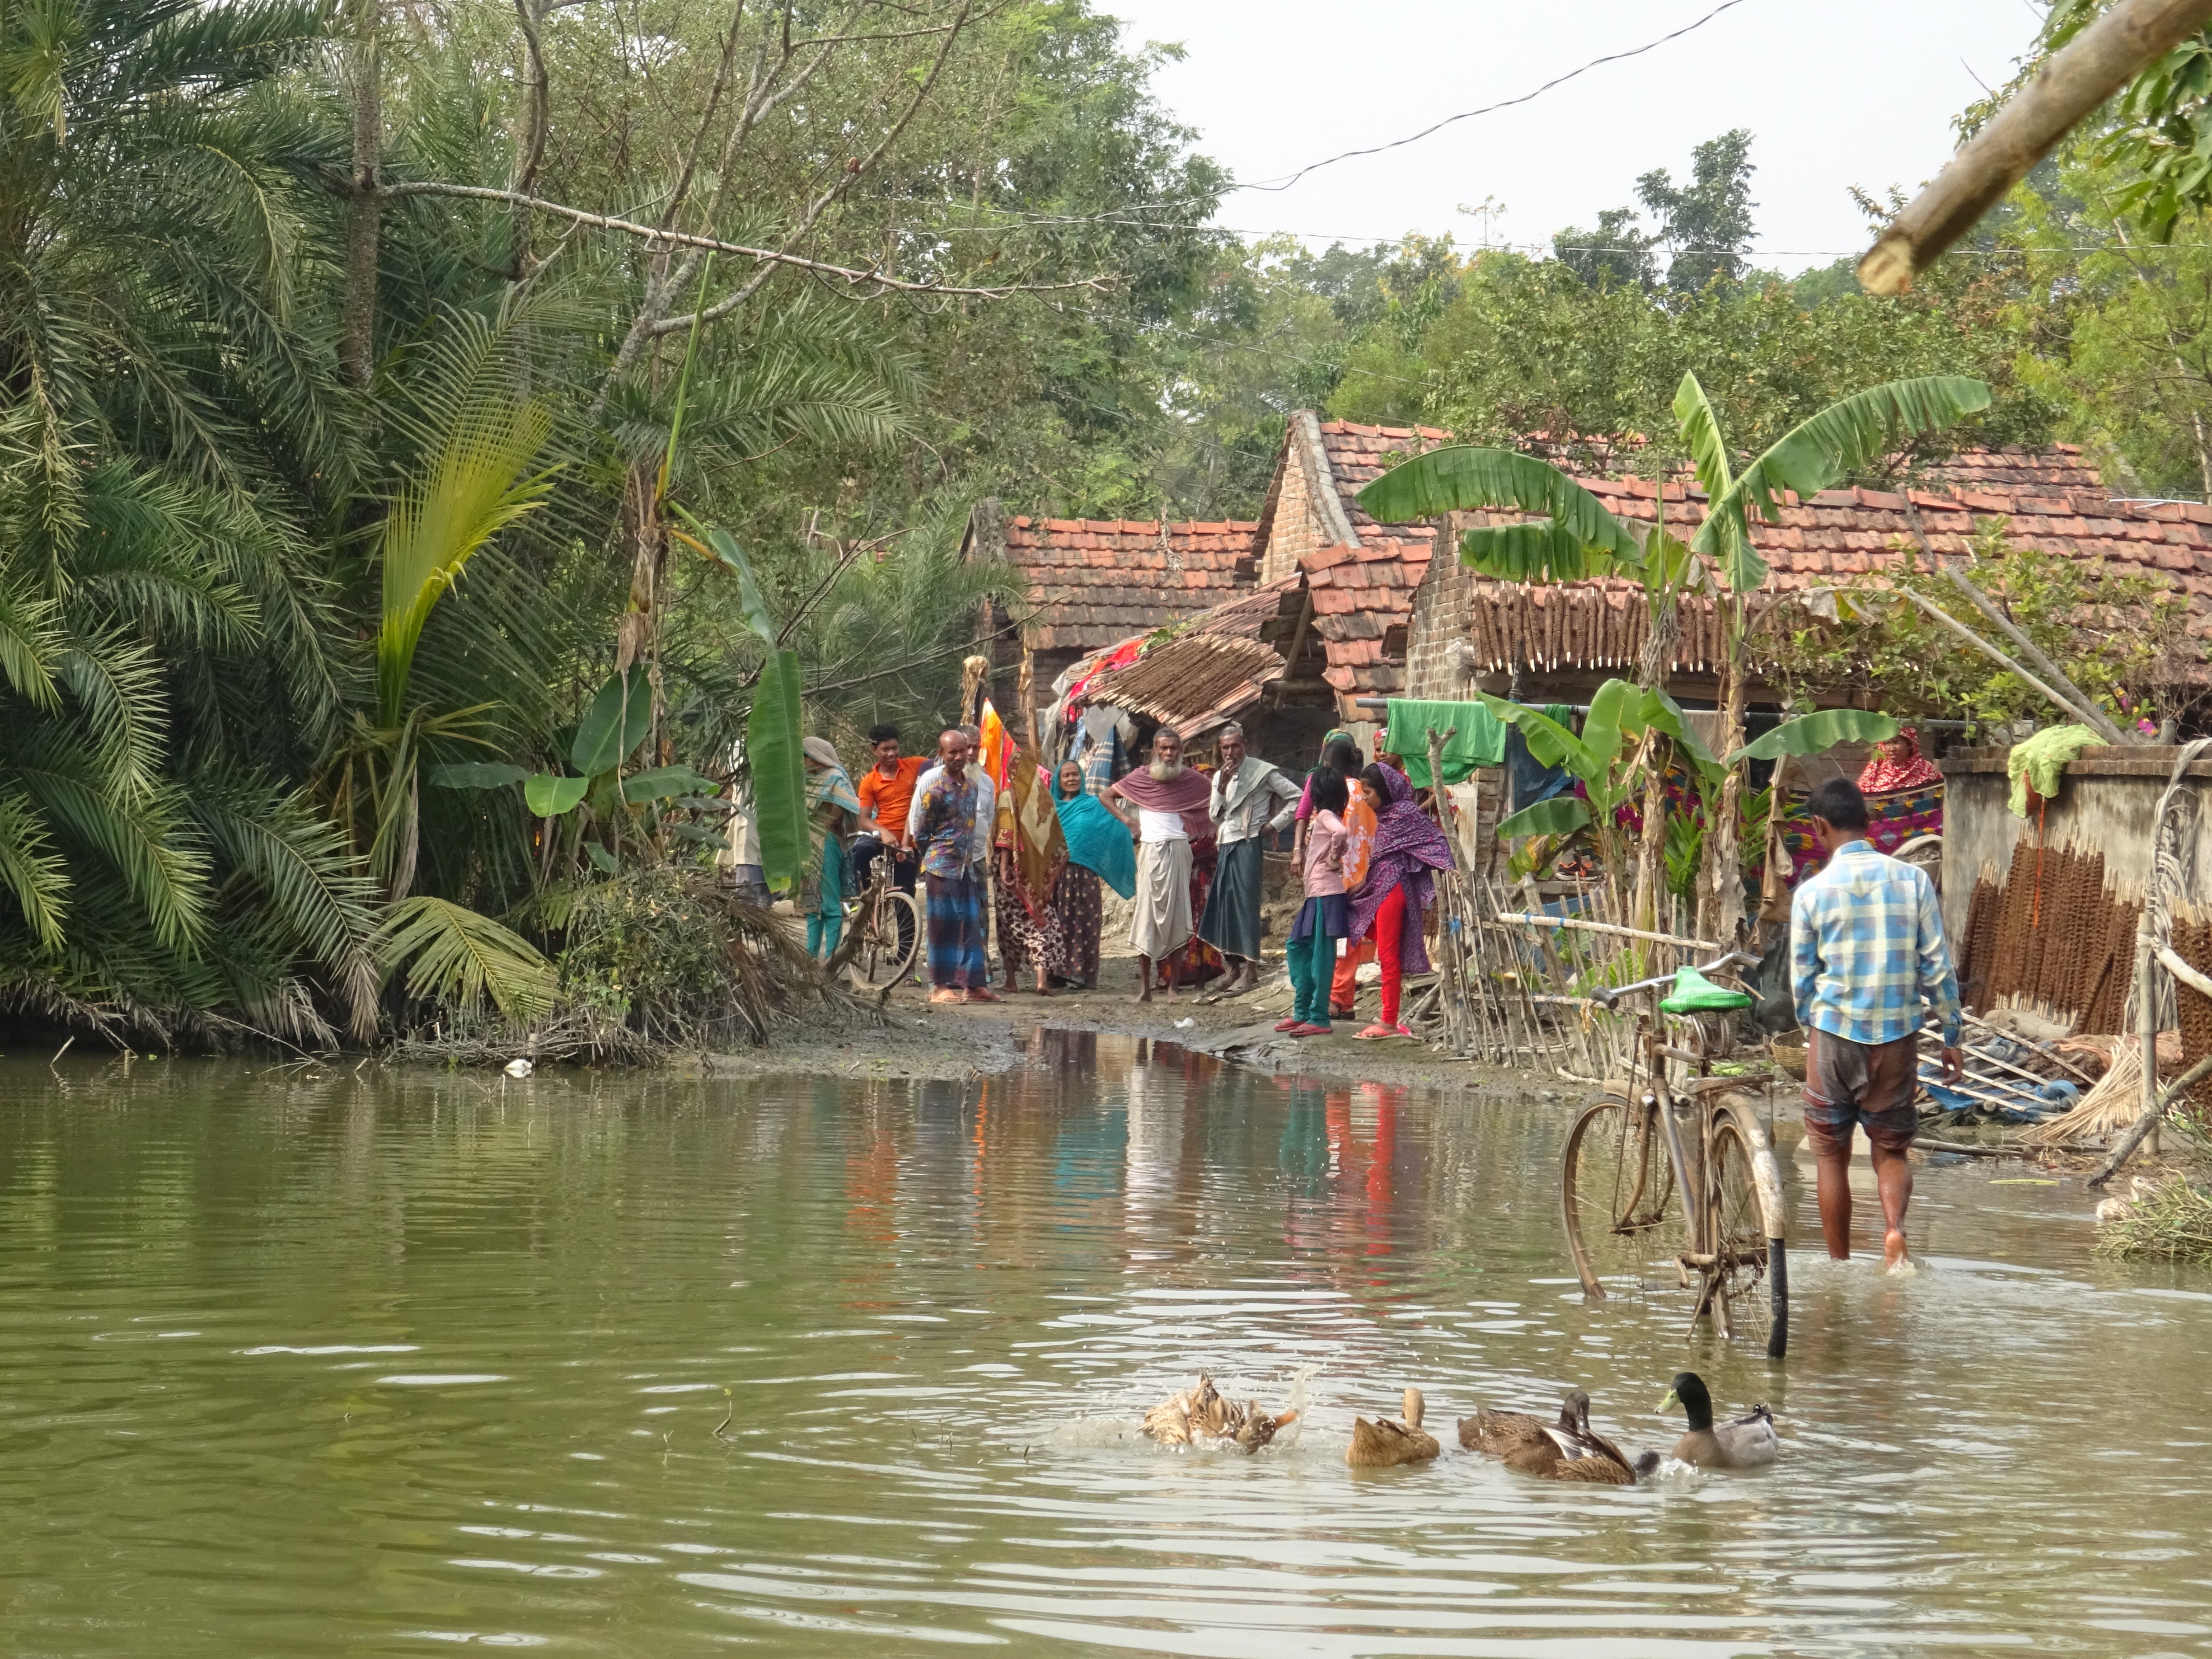 Waterlogging is a severe problem in the densely populated delta of Bangladesh